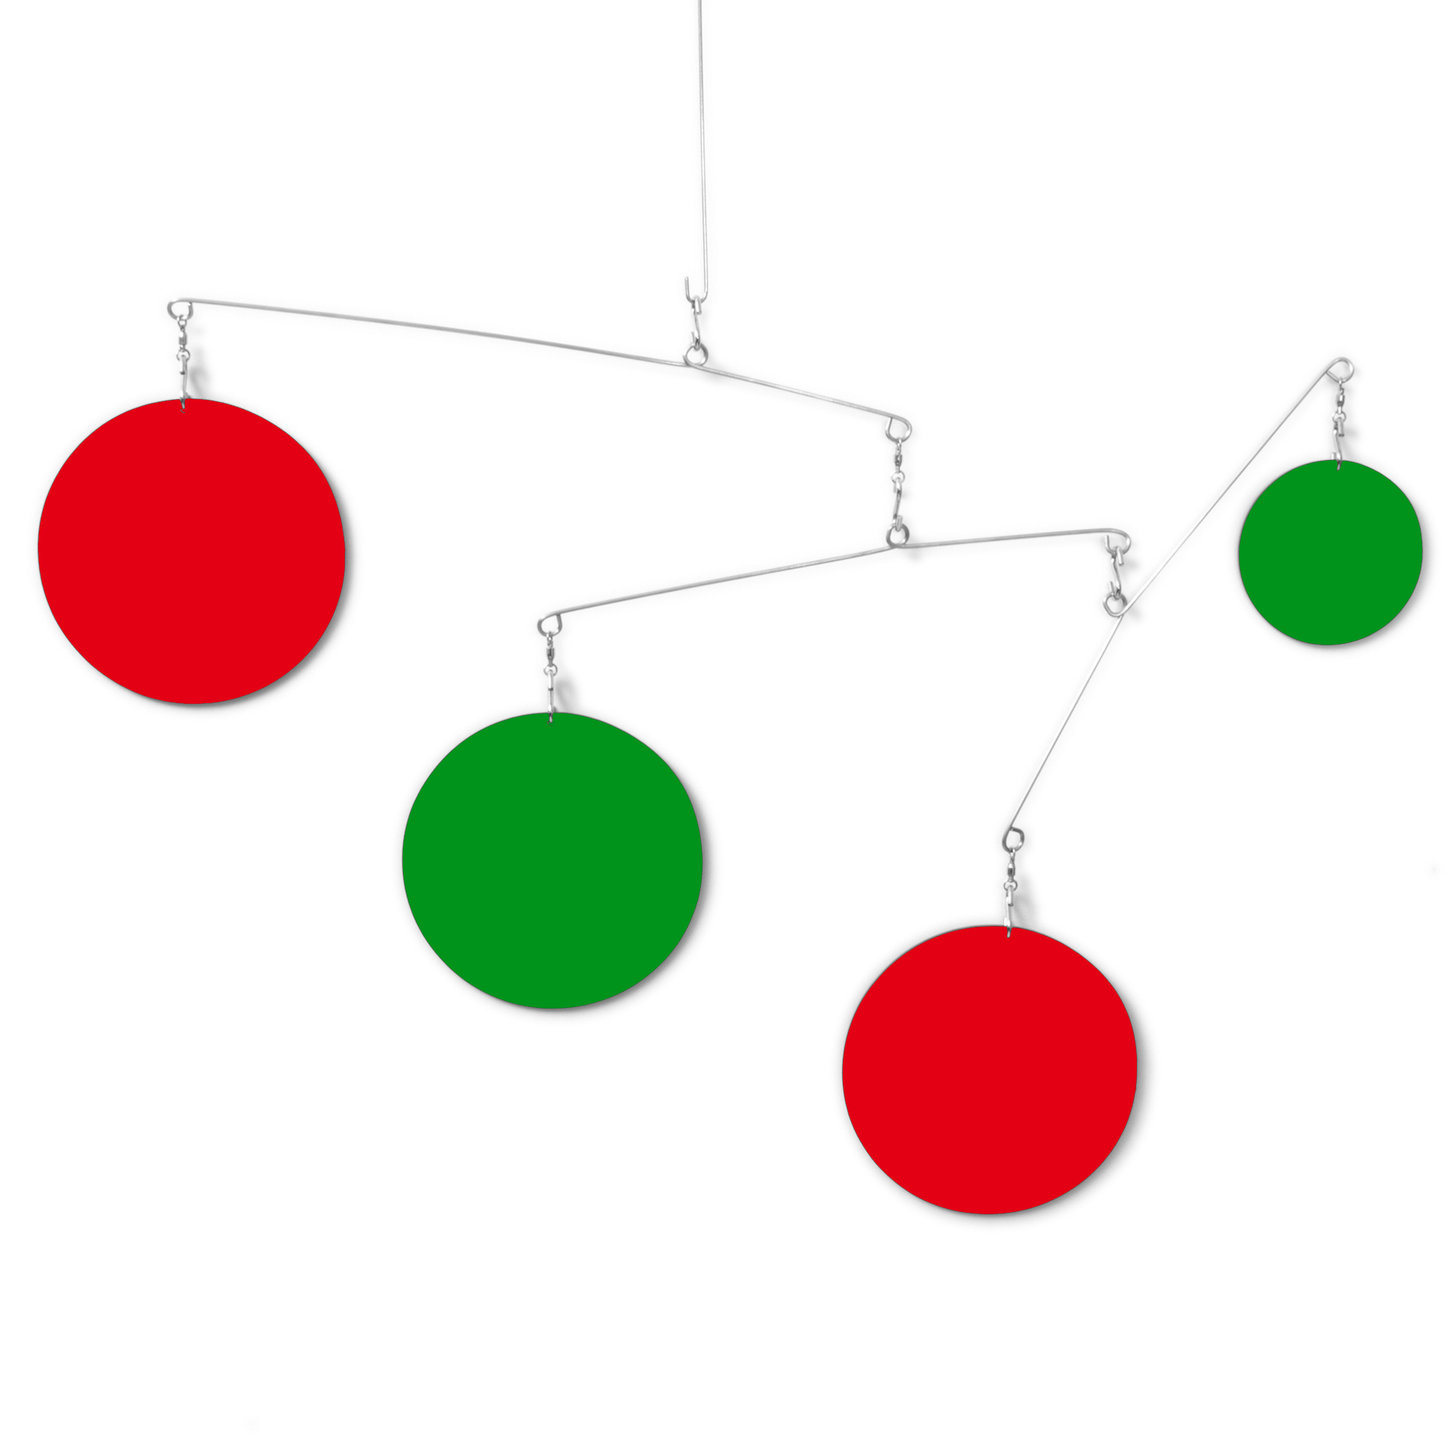 Beautiful hanging art mobiles in festive Christmas colors of red and green by AtomicMobiles.com